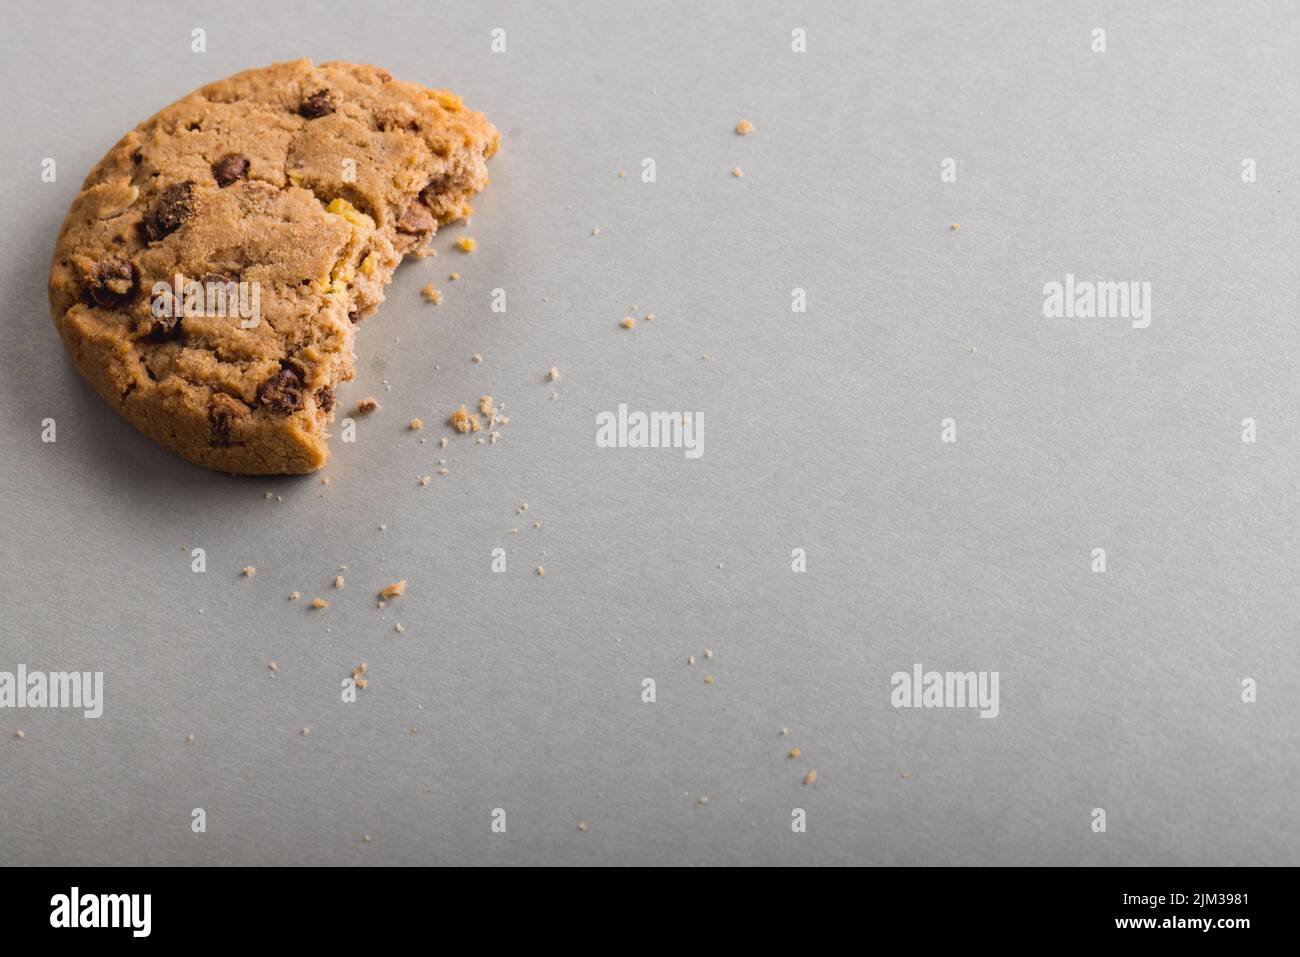 High angle view of half eaten cookie on gray background with copy space. unaltered, food, still life, studio shot. Stock Photo